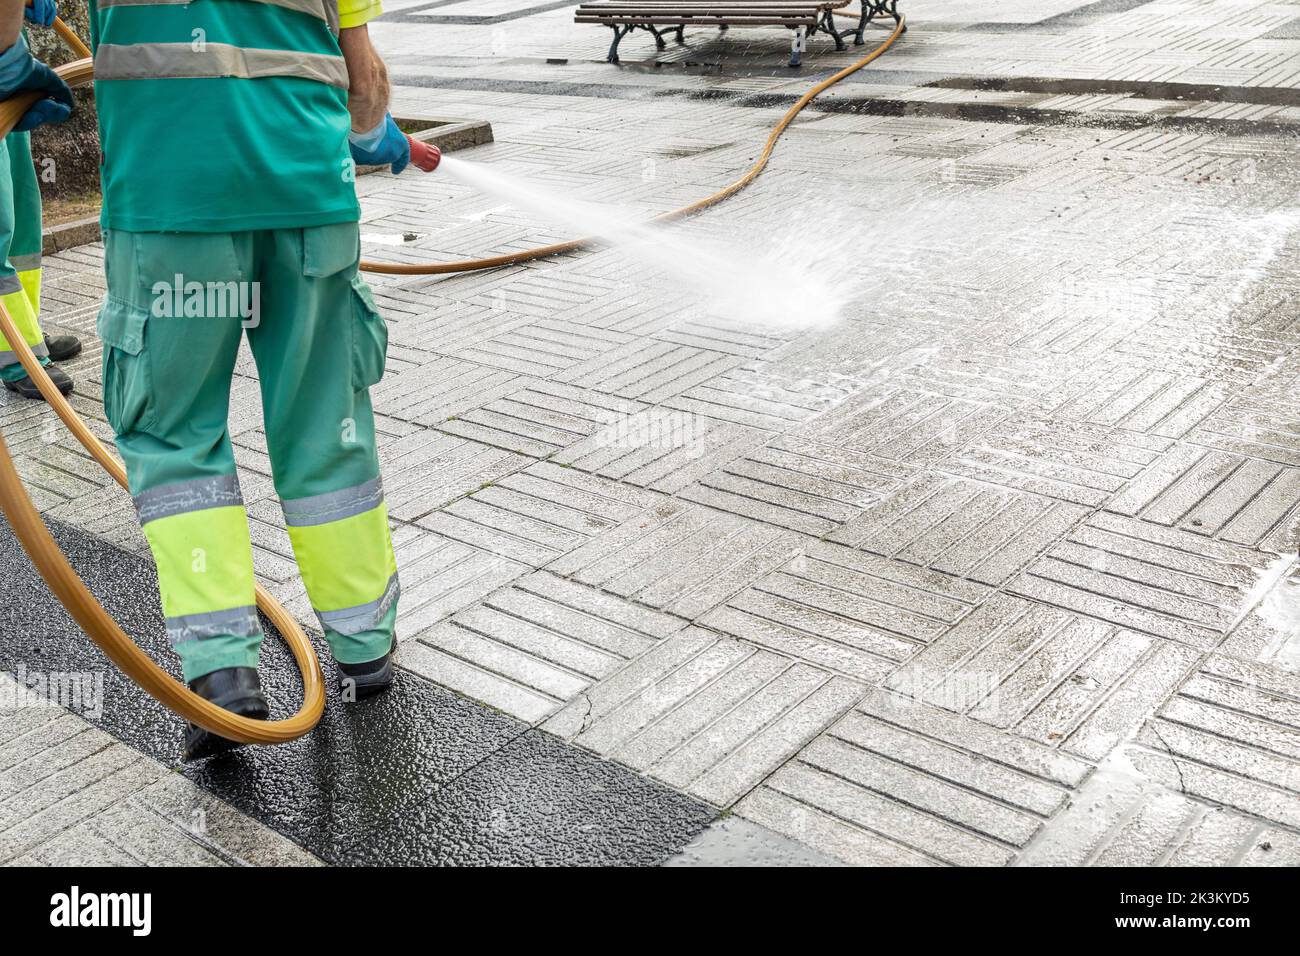 Worker cleaning a city square with water using a hosepipe. Public maintenance concept. Copy space Stock Photo